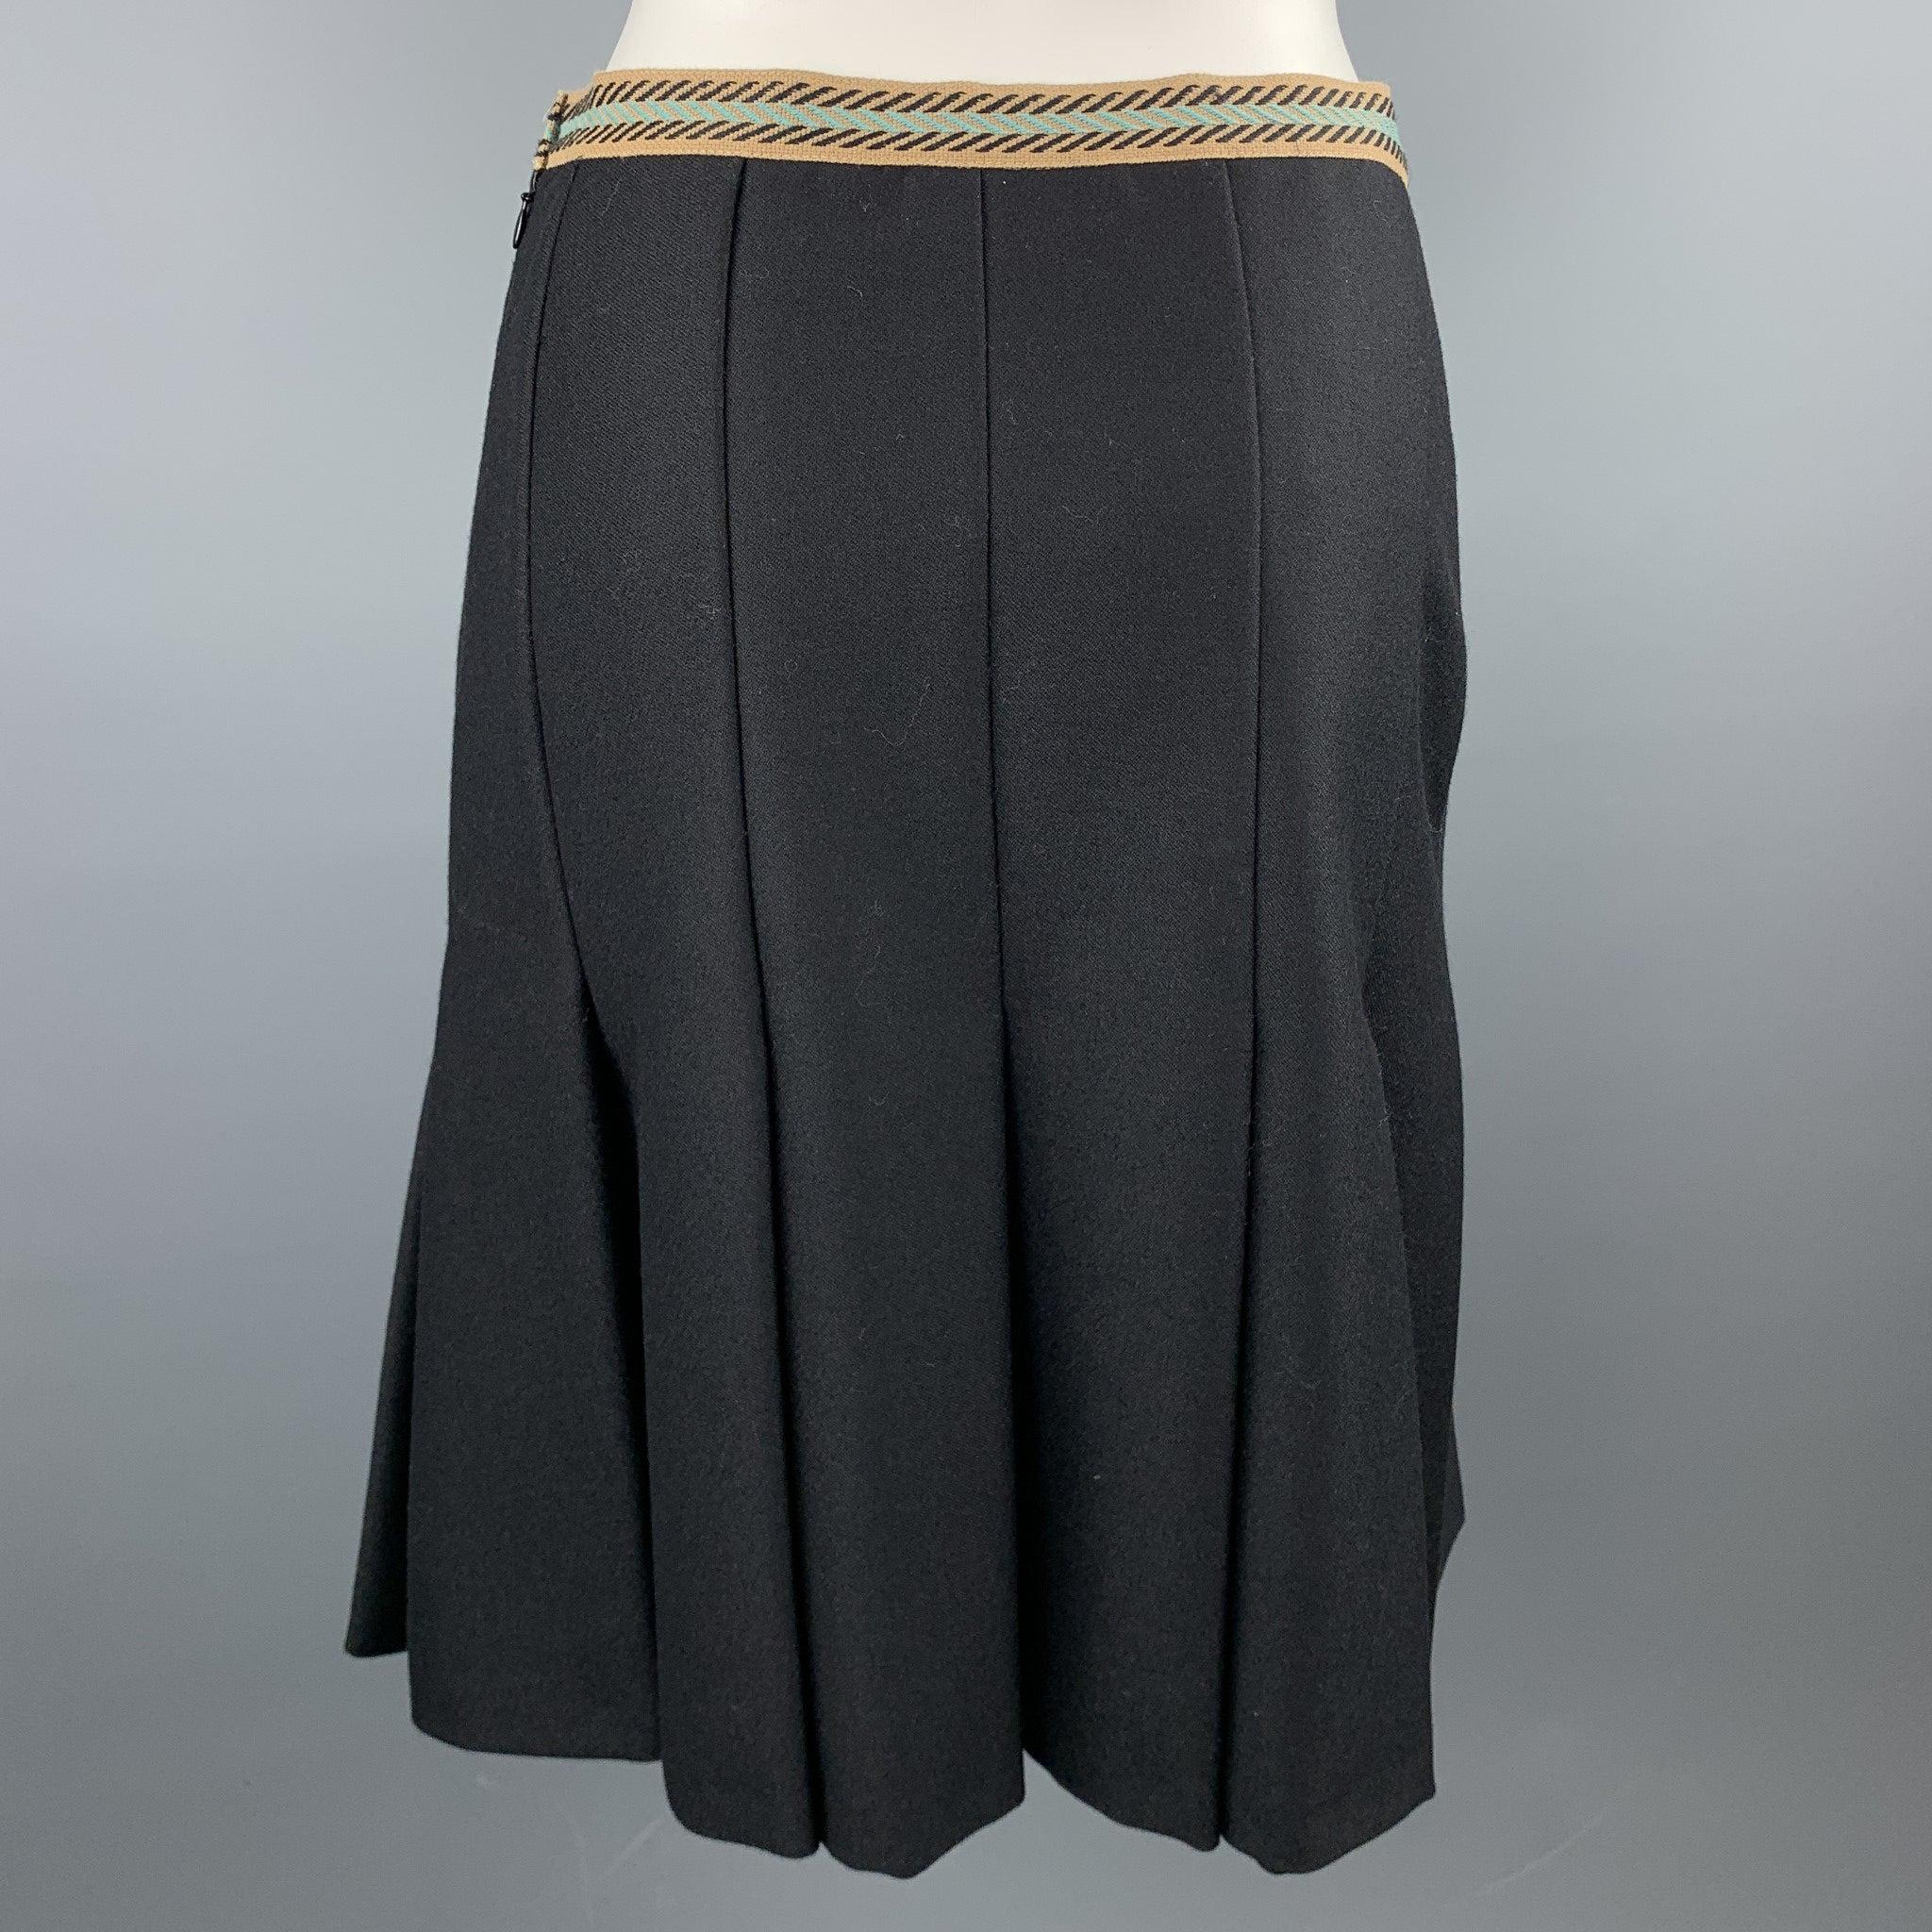 M MISSONI Size 6 Black Twill Wool Pleated A-Line Skirt In Good Condition For Sale In San Francisco, CA